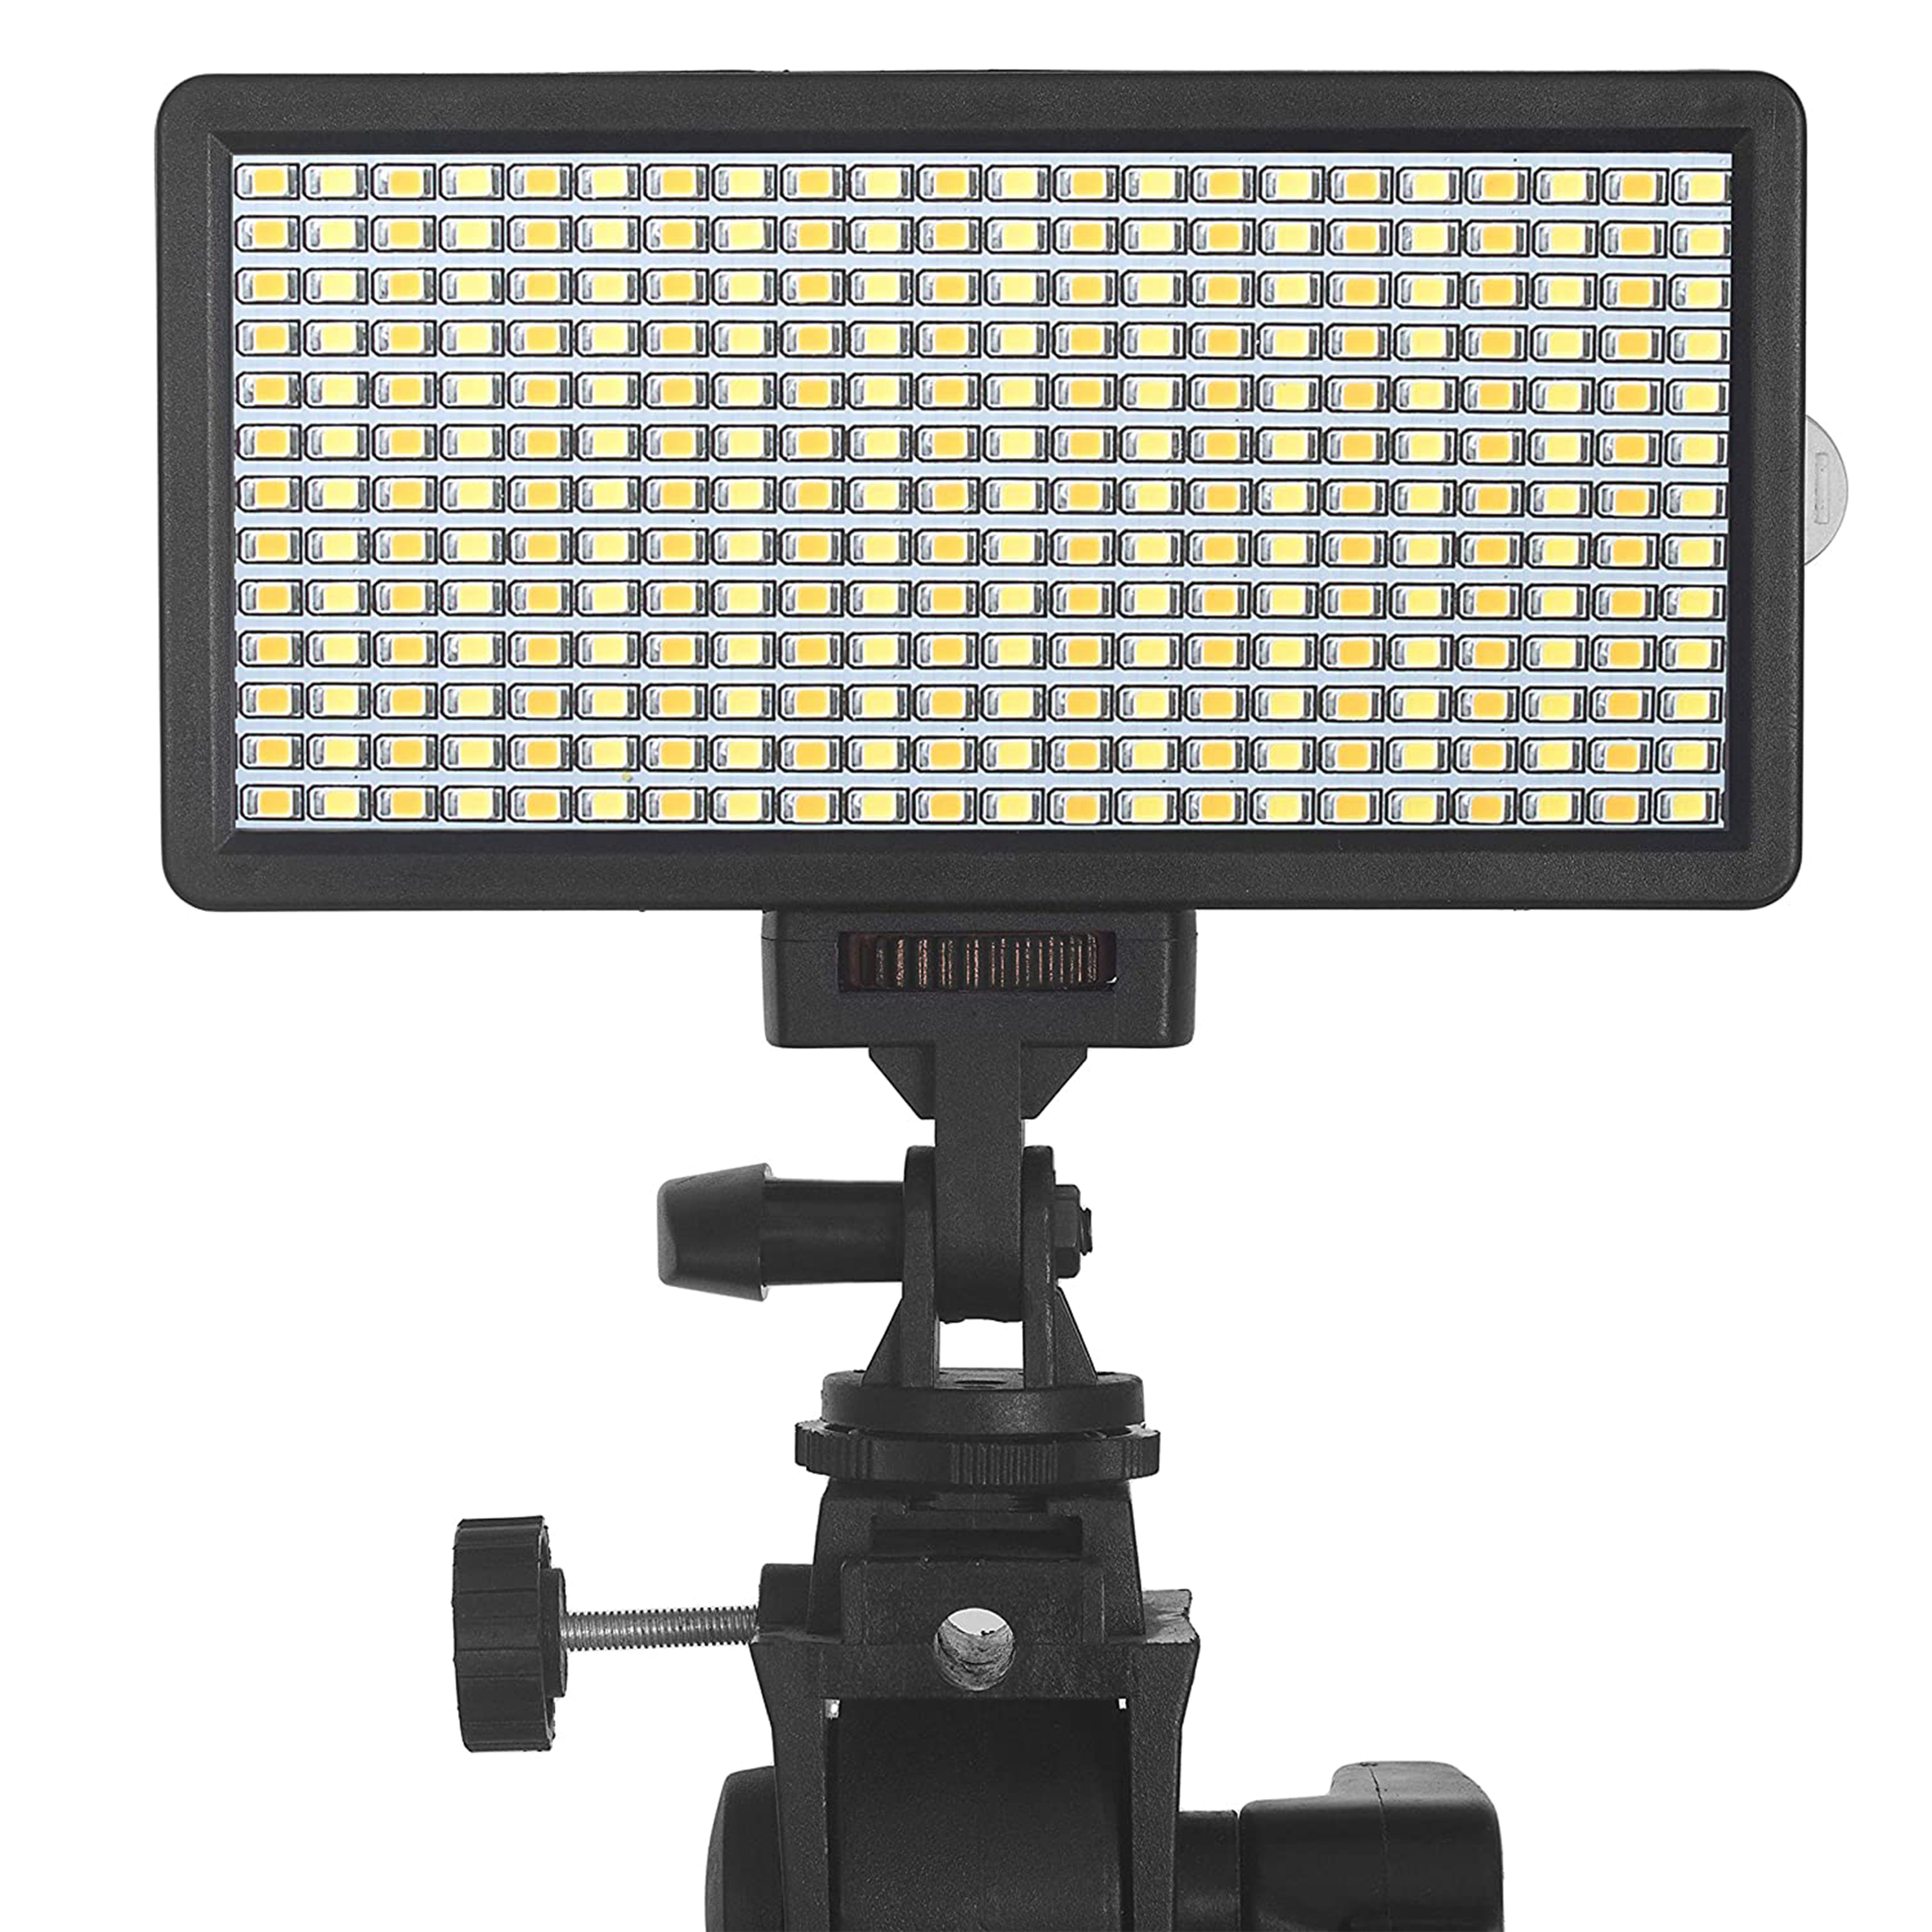 Professional Video Light FL-309 With 13900 mAh Battery for YouTube Video